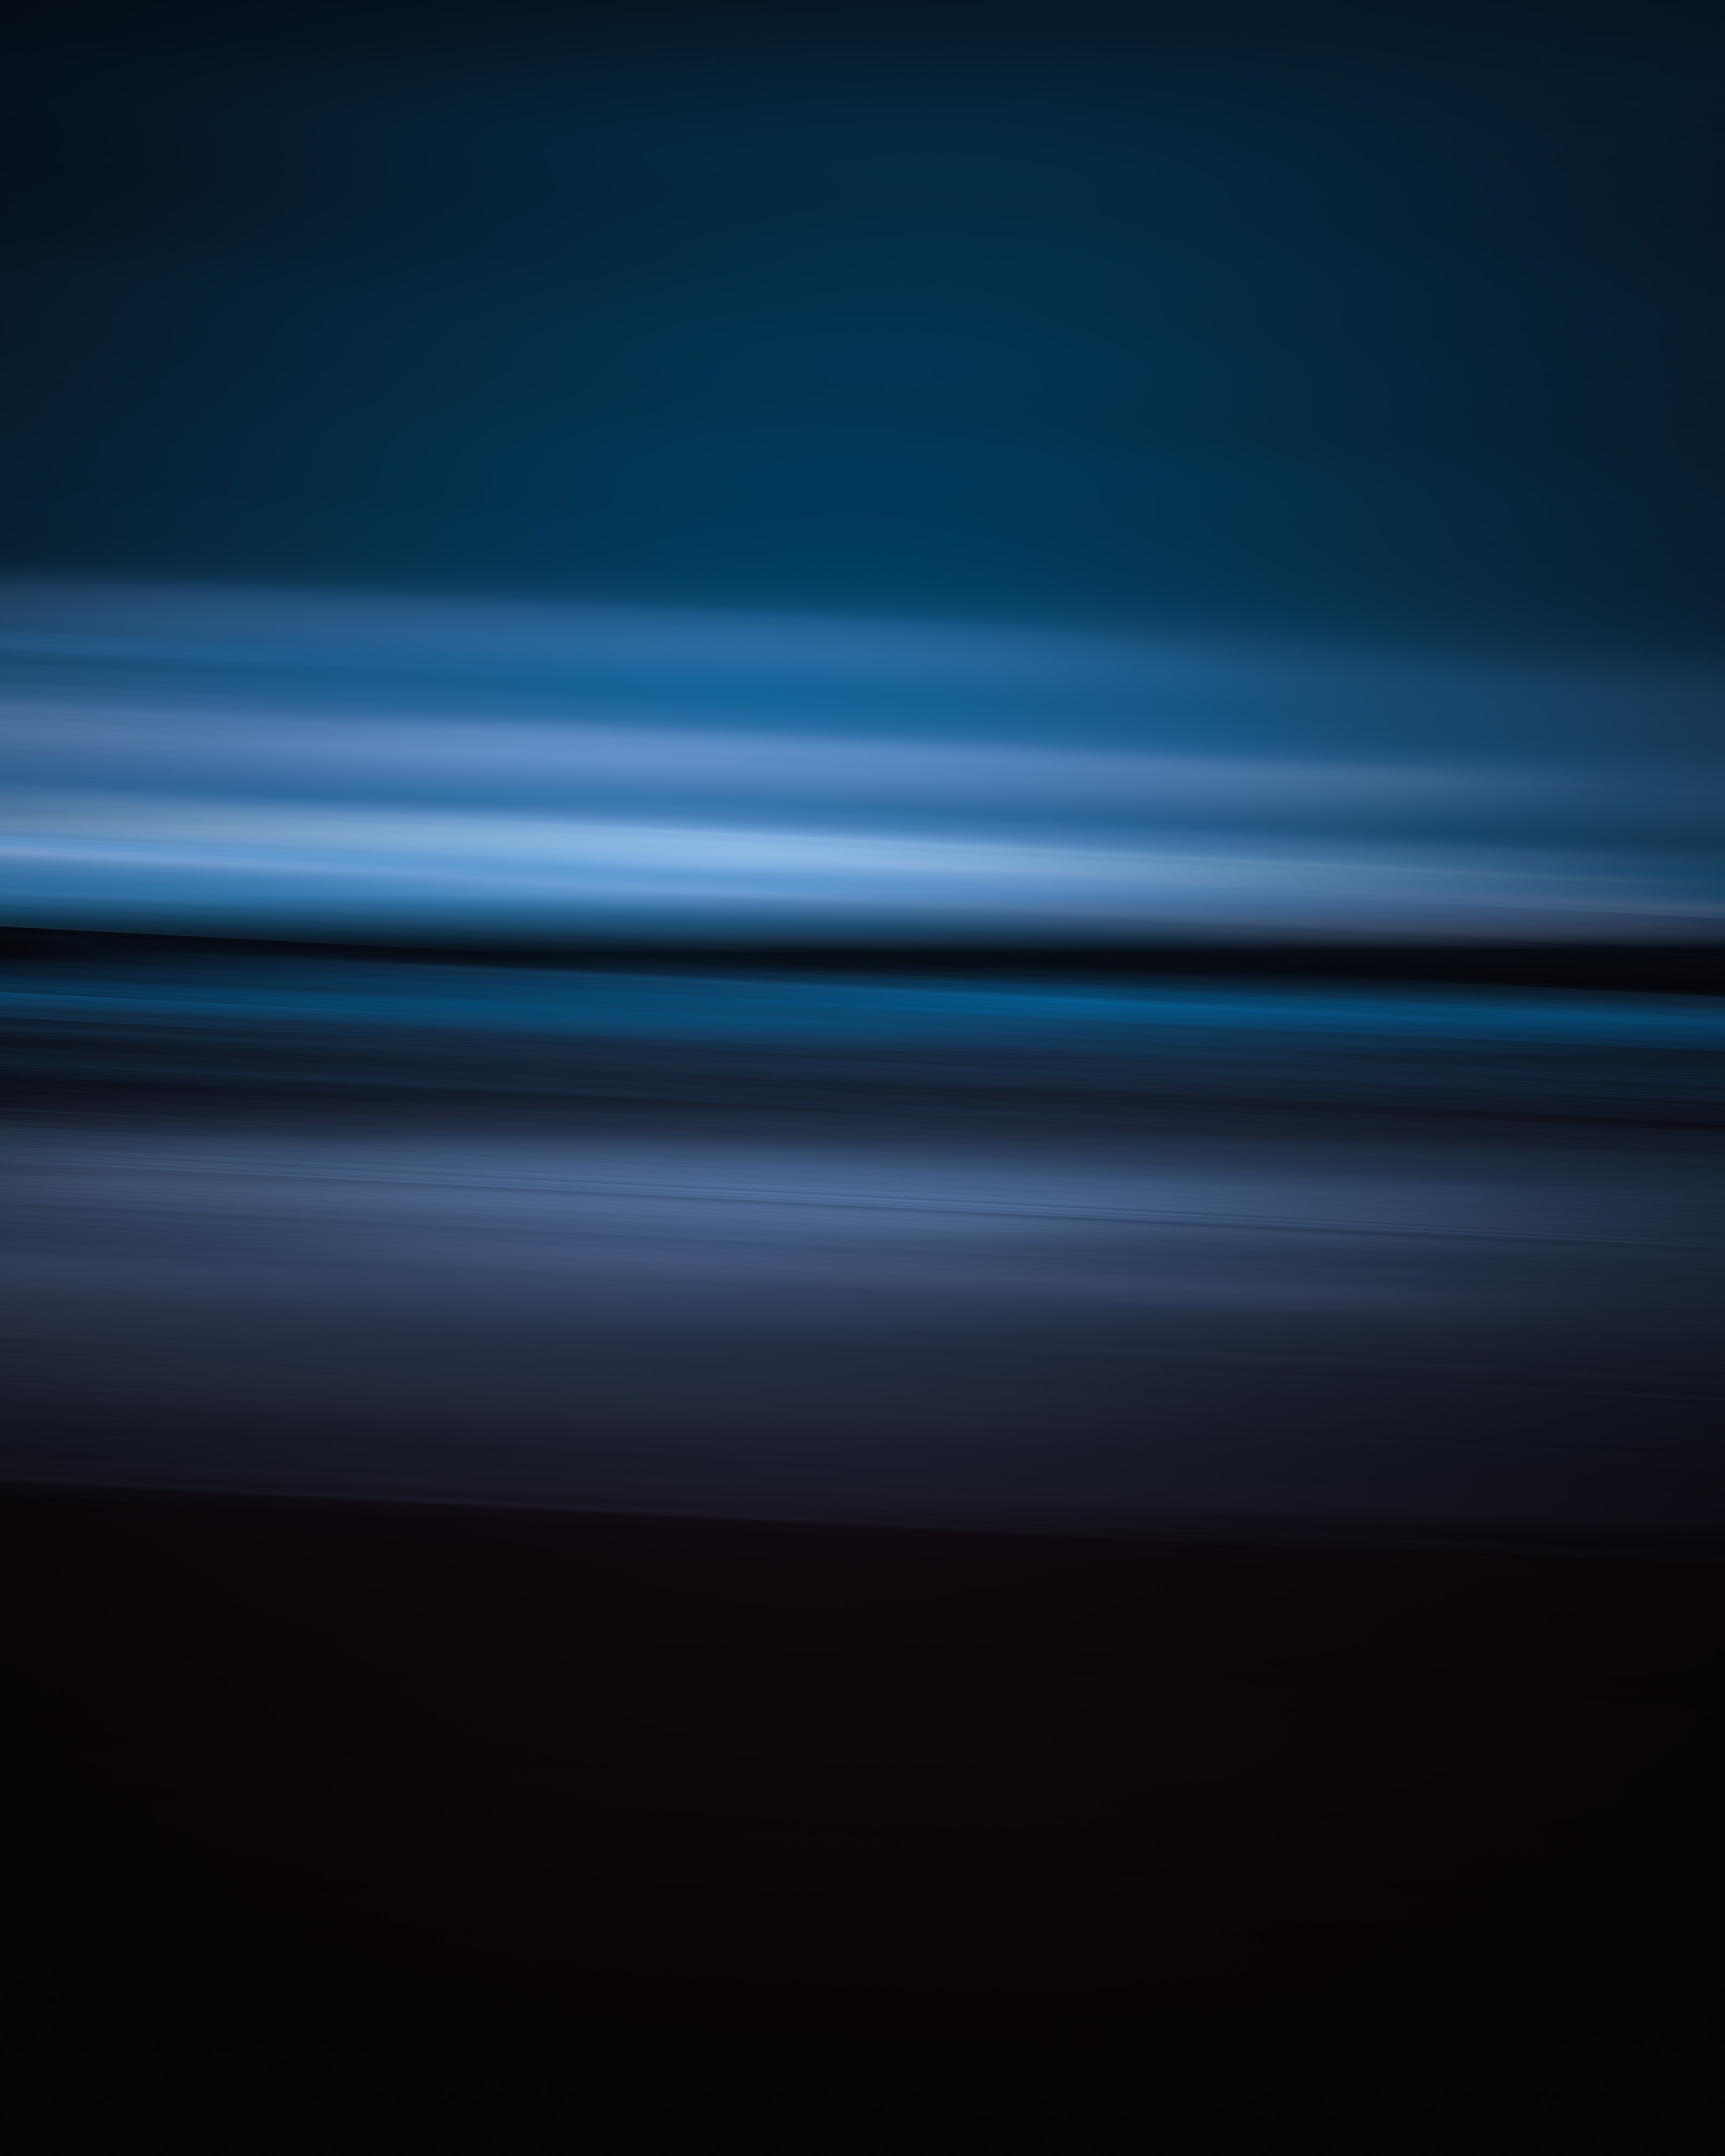 blur, abstract, streaks, stripes, blue, smooth, distortion